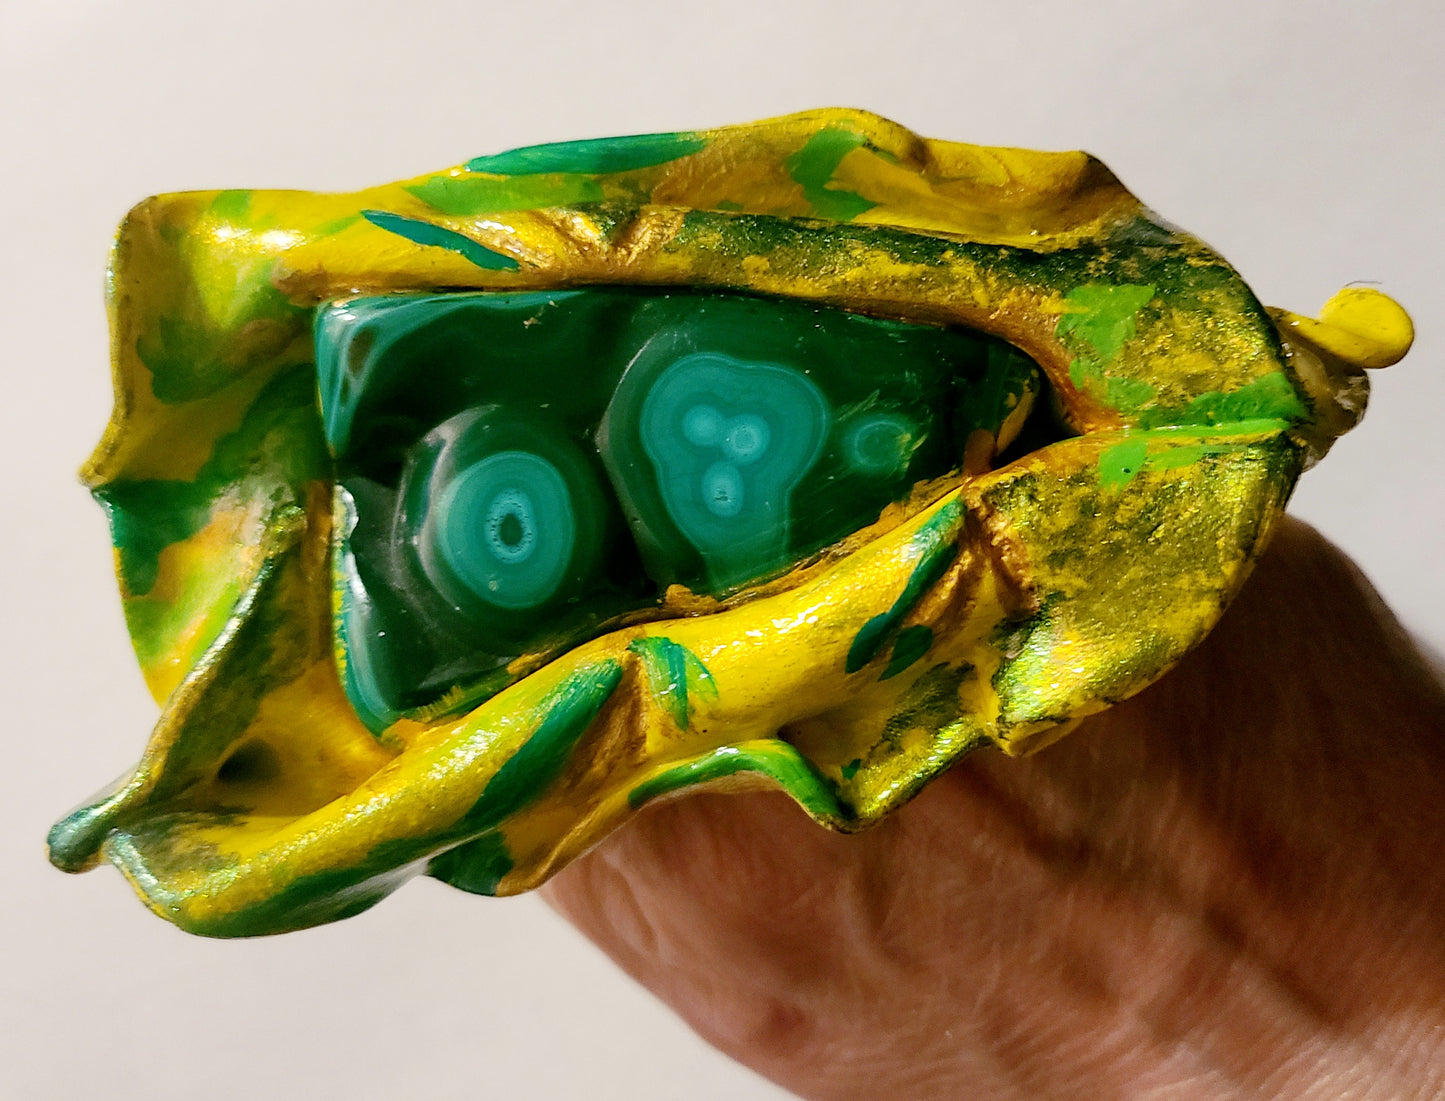 Hand Sculpted Yoni Ring with Polished Malachite Stone, Green Yellow & Gold Sensuous Adjustable Hand Ring, Haute Couture Runway Ready Finger Candy